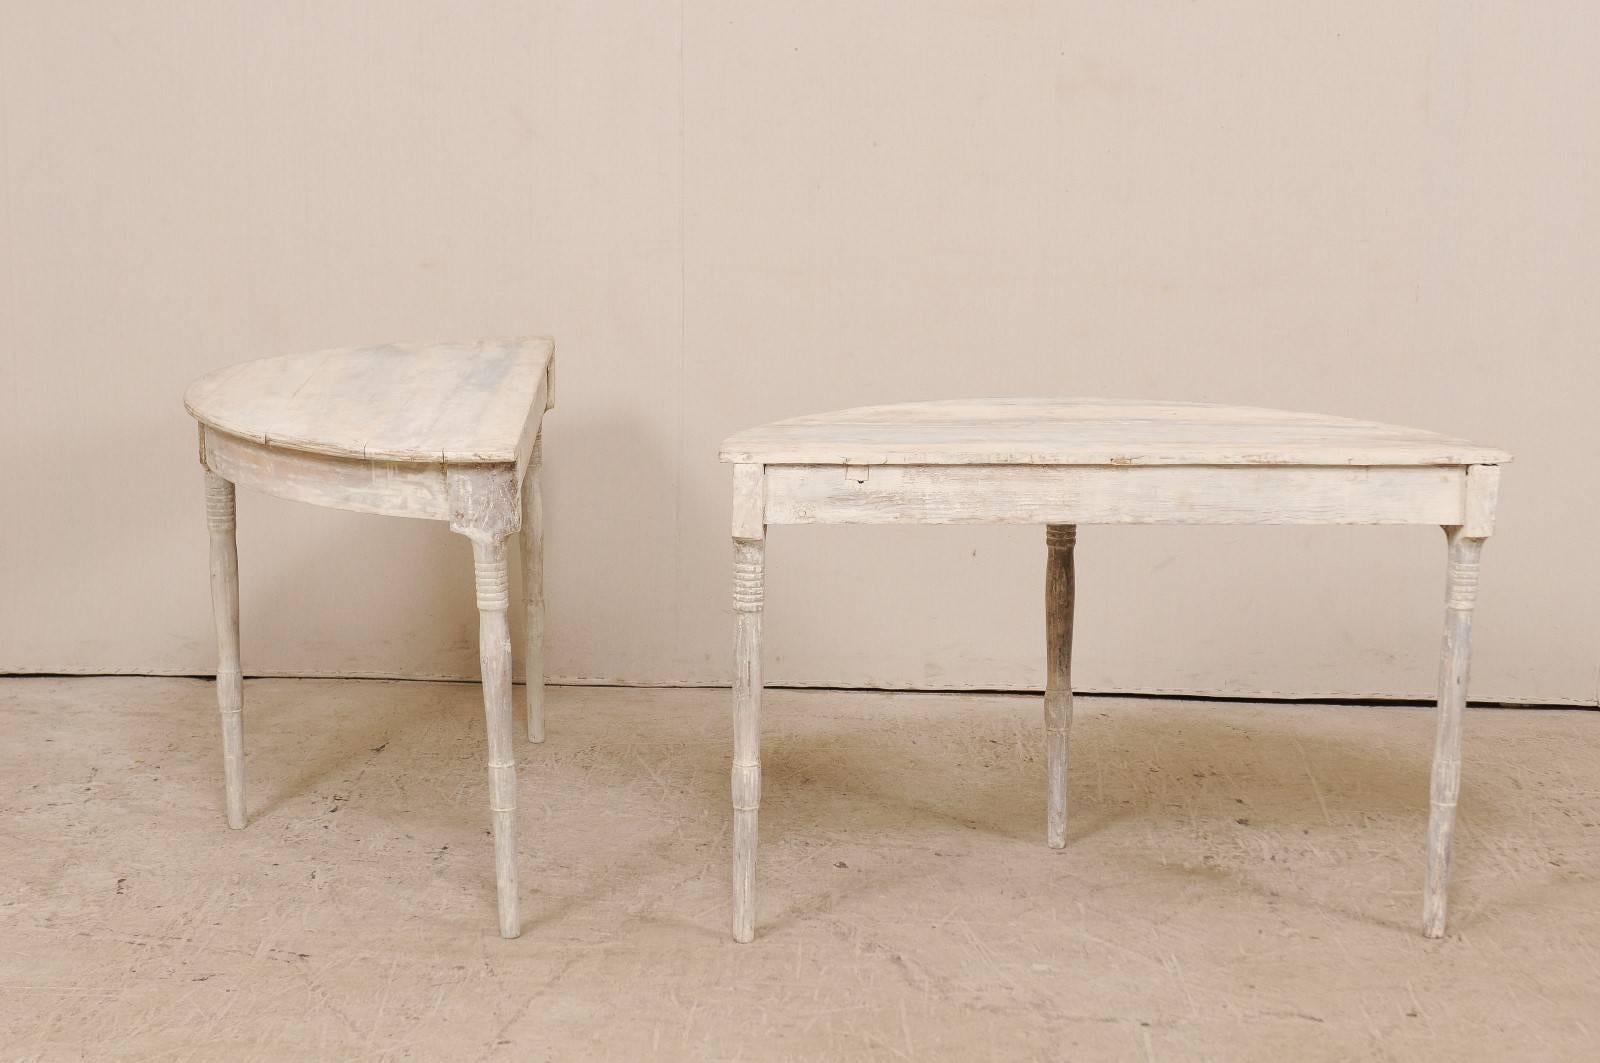 Pair of 19th Century Swedish Demilune Tables in Pale Grey and White Hues 2